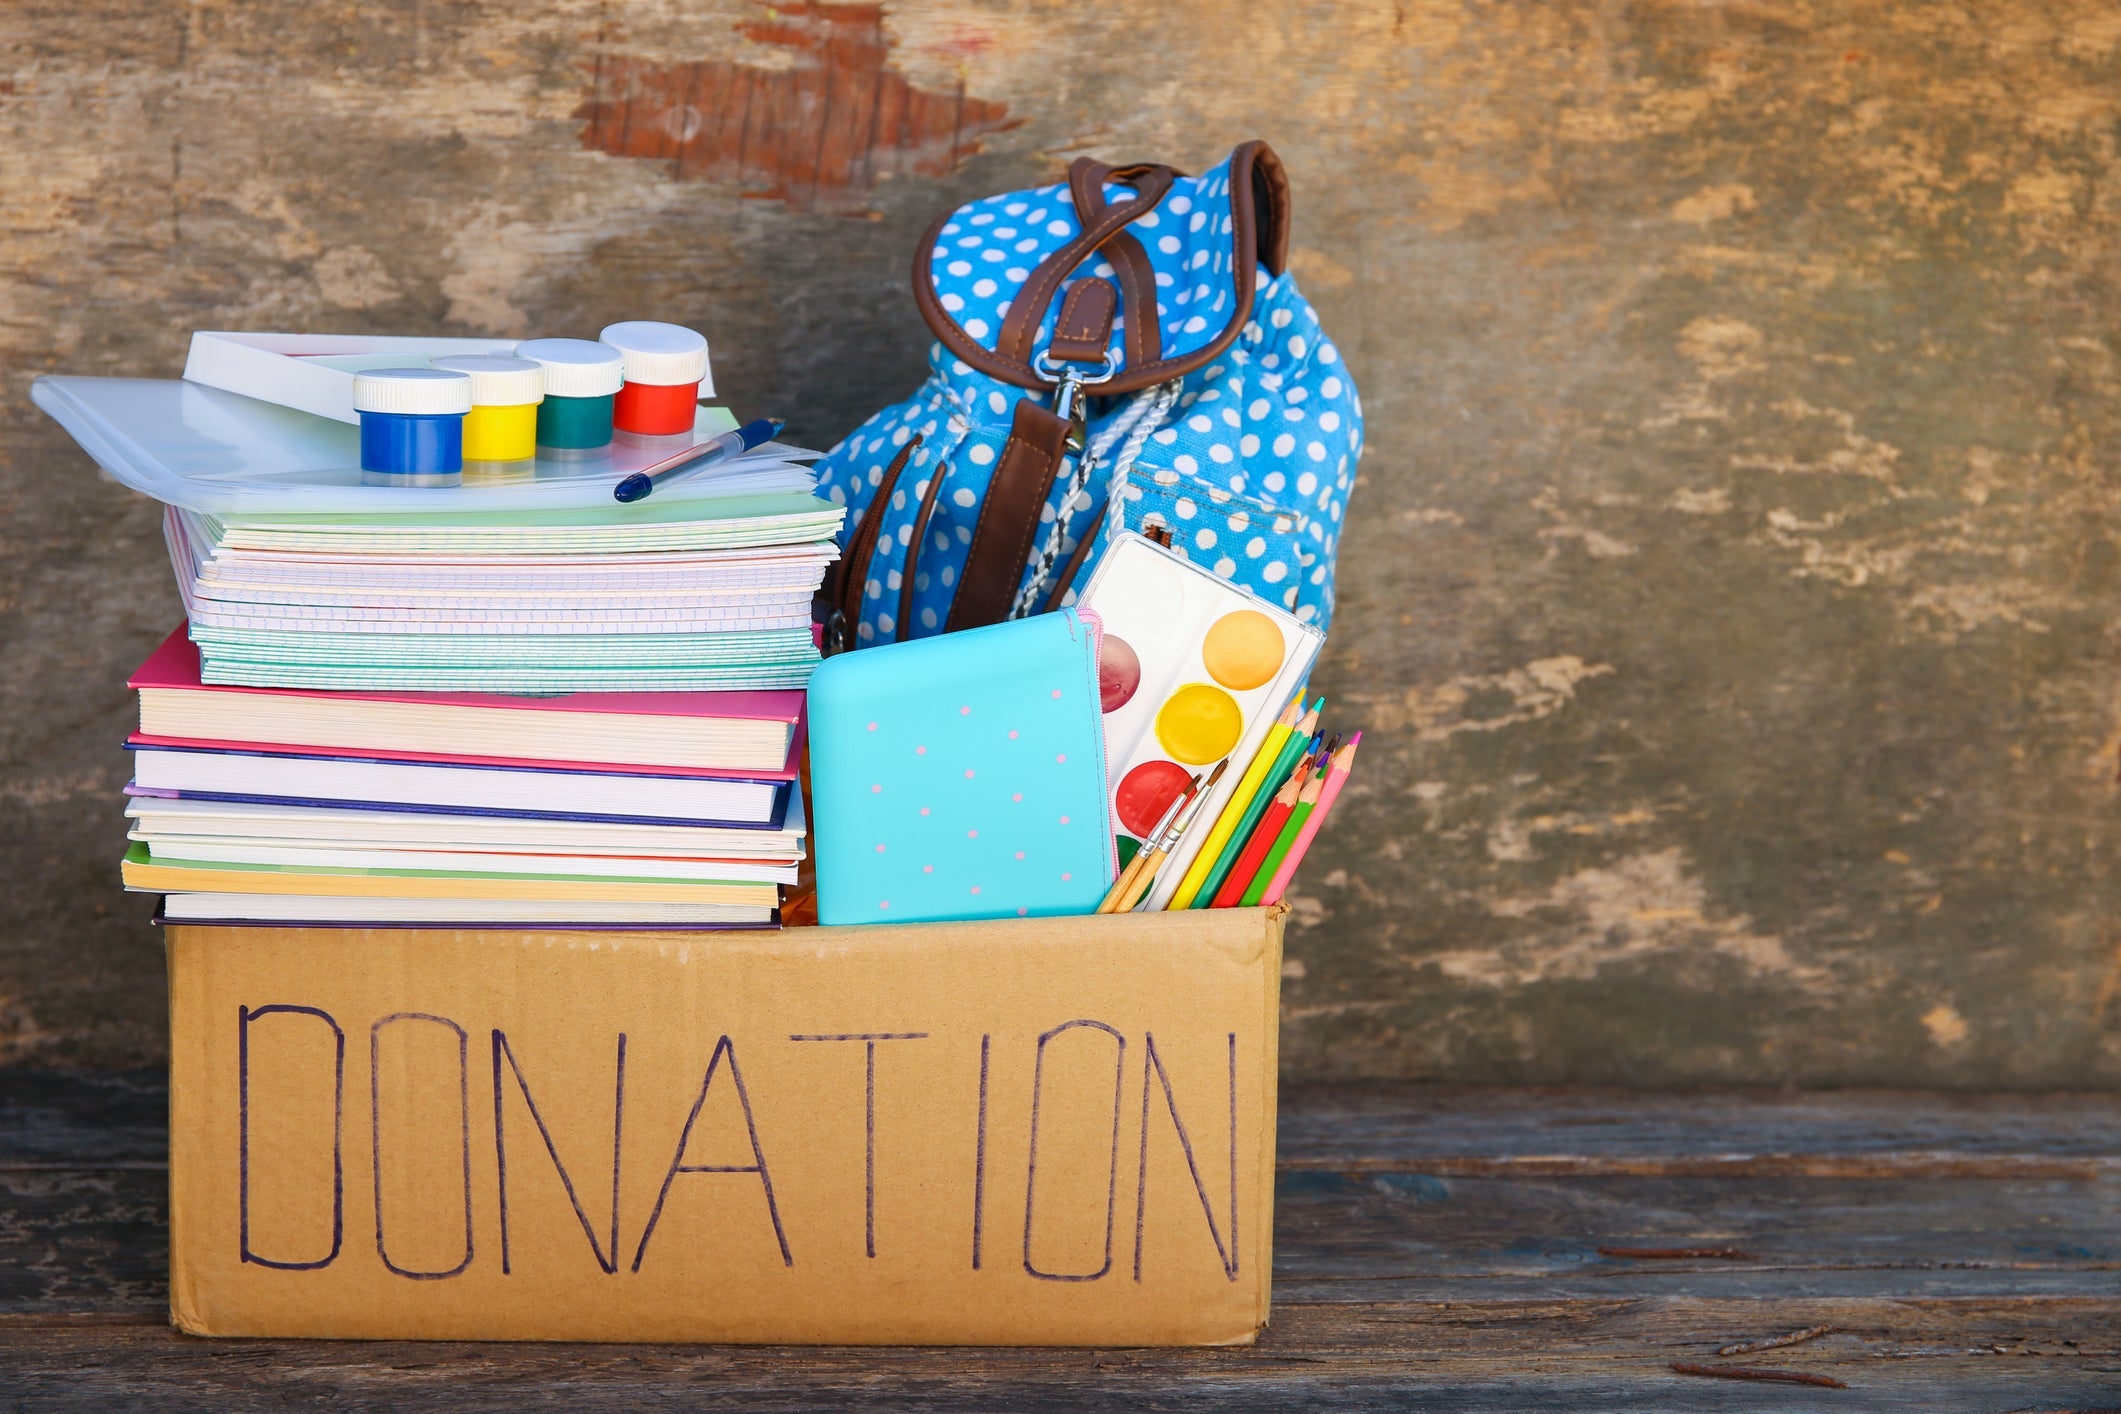 Where to Donate School Supplies